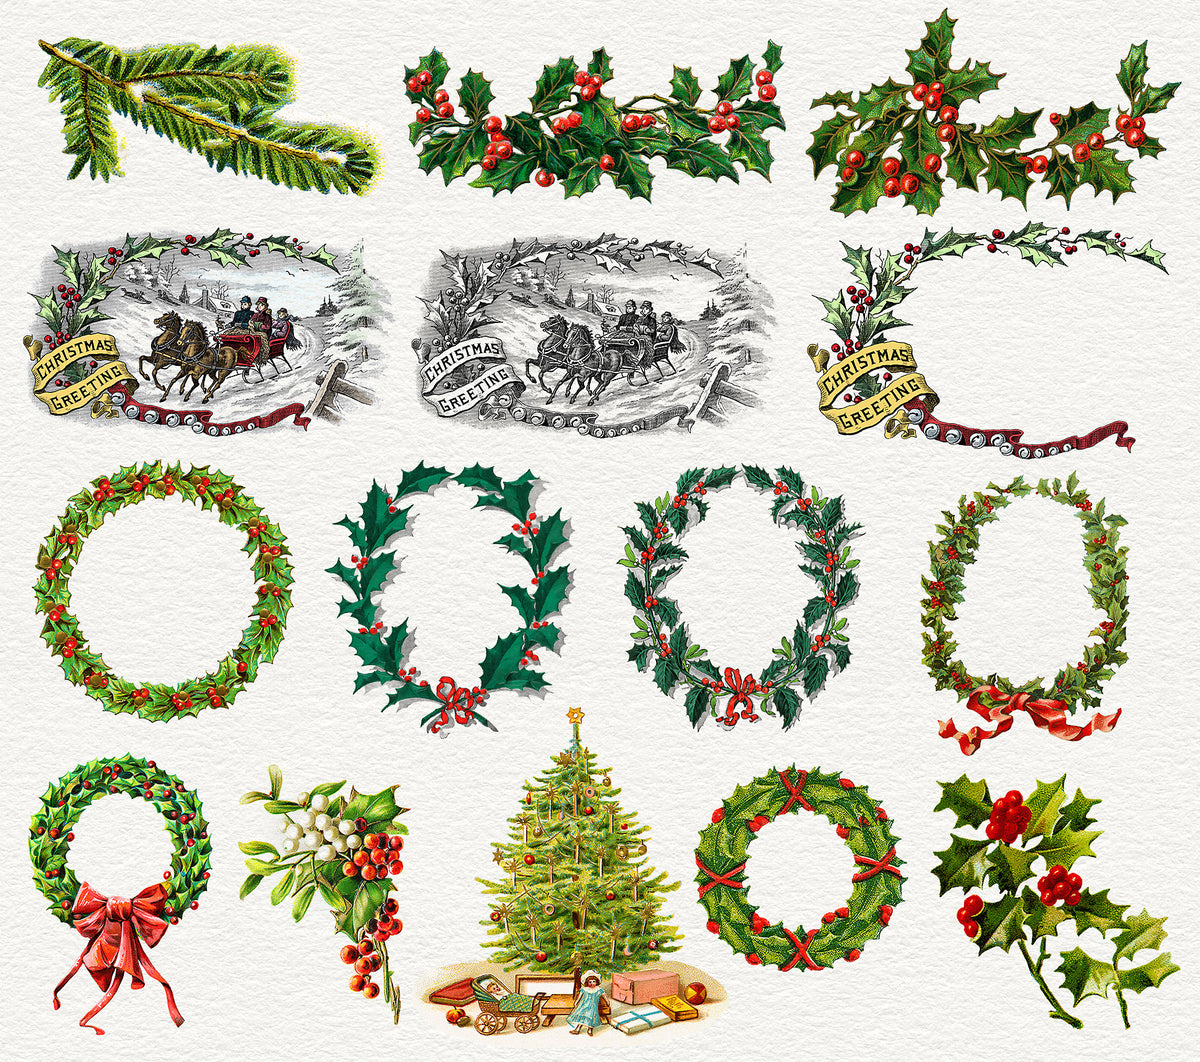 Vintage Christmas Illustrations Compendium  Holly and greenery graphics.